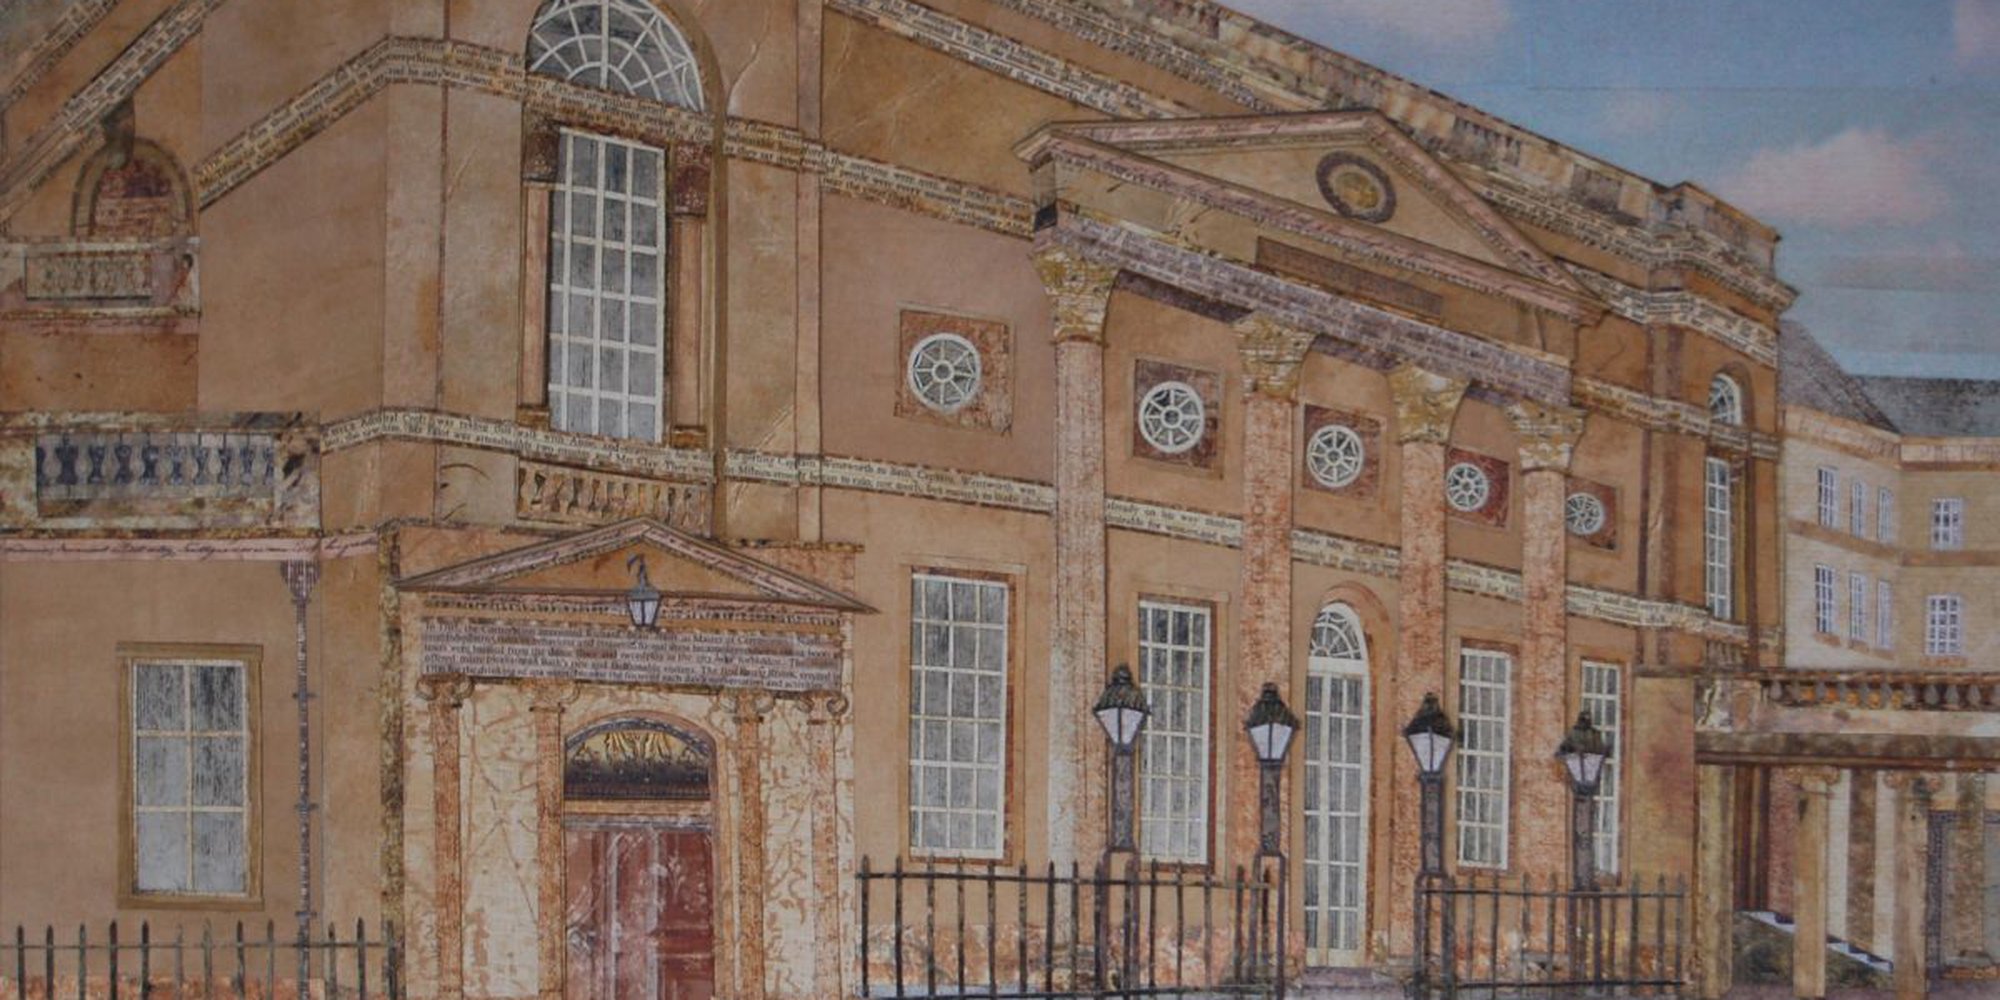 Art of the Day: "The Pump Room, Bath, 2017" by Beth lievesley